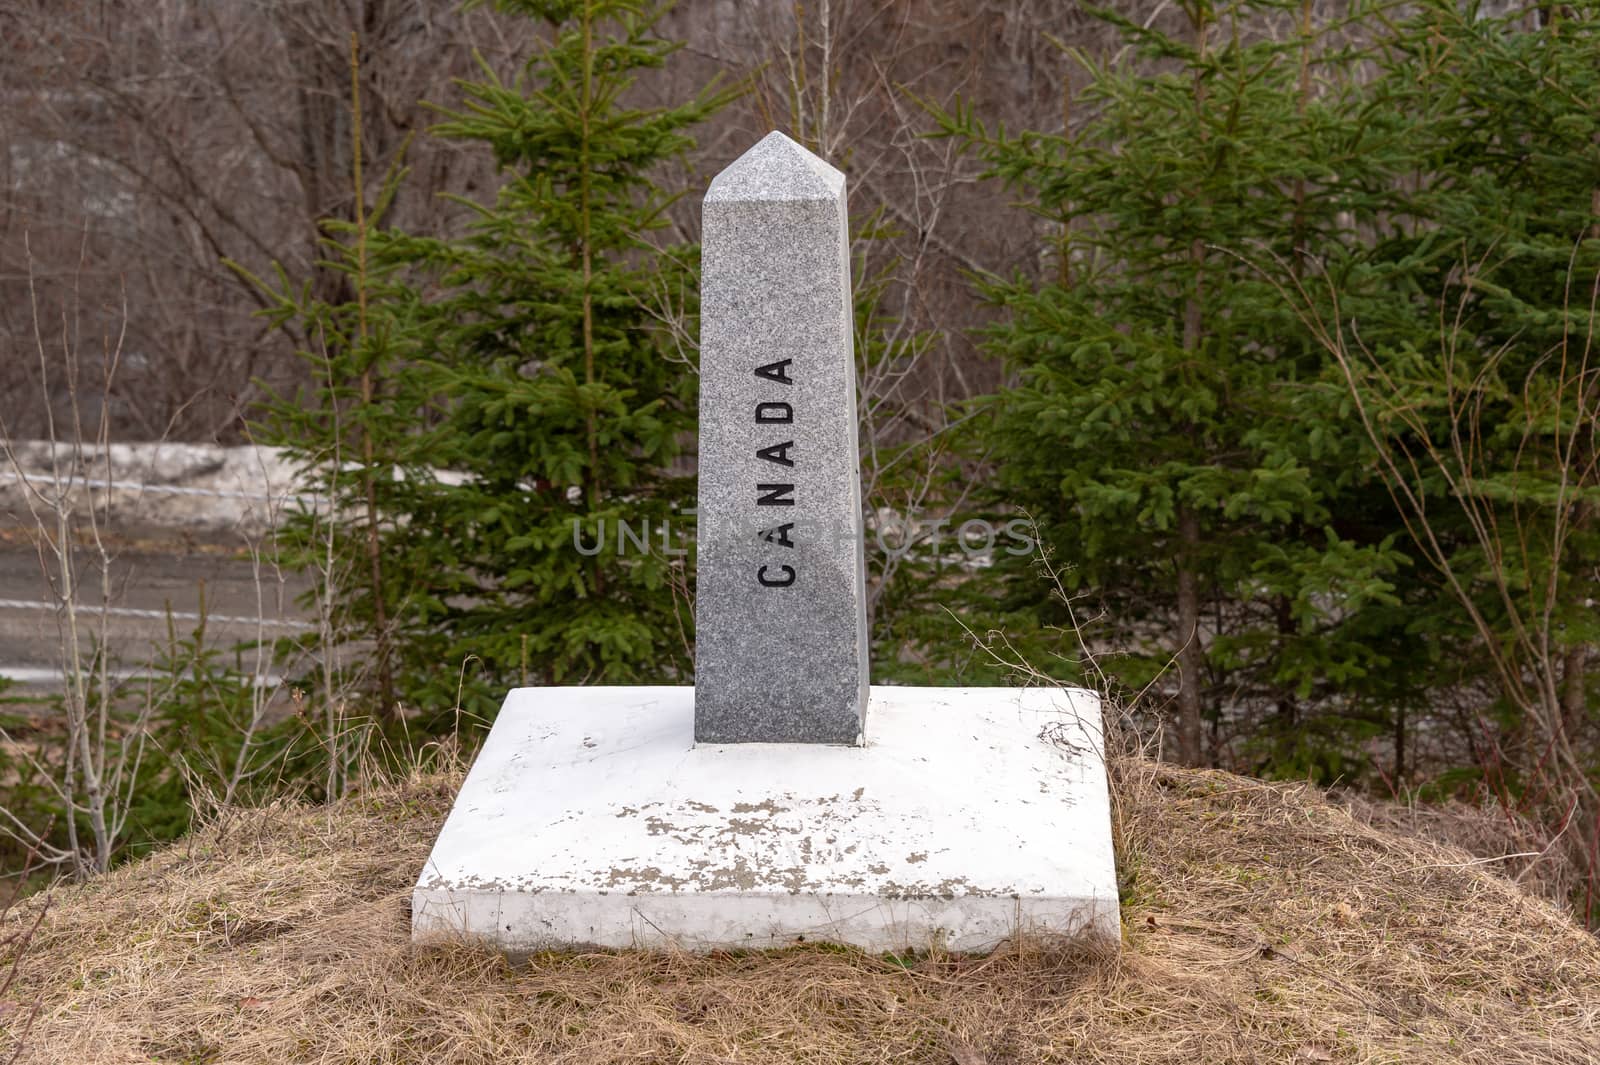 A boundary stone marks the US/Canada border in Quebec, near Coaticook.